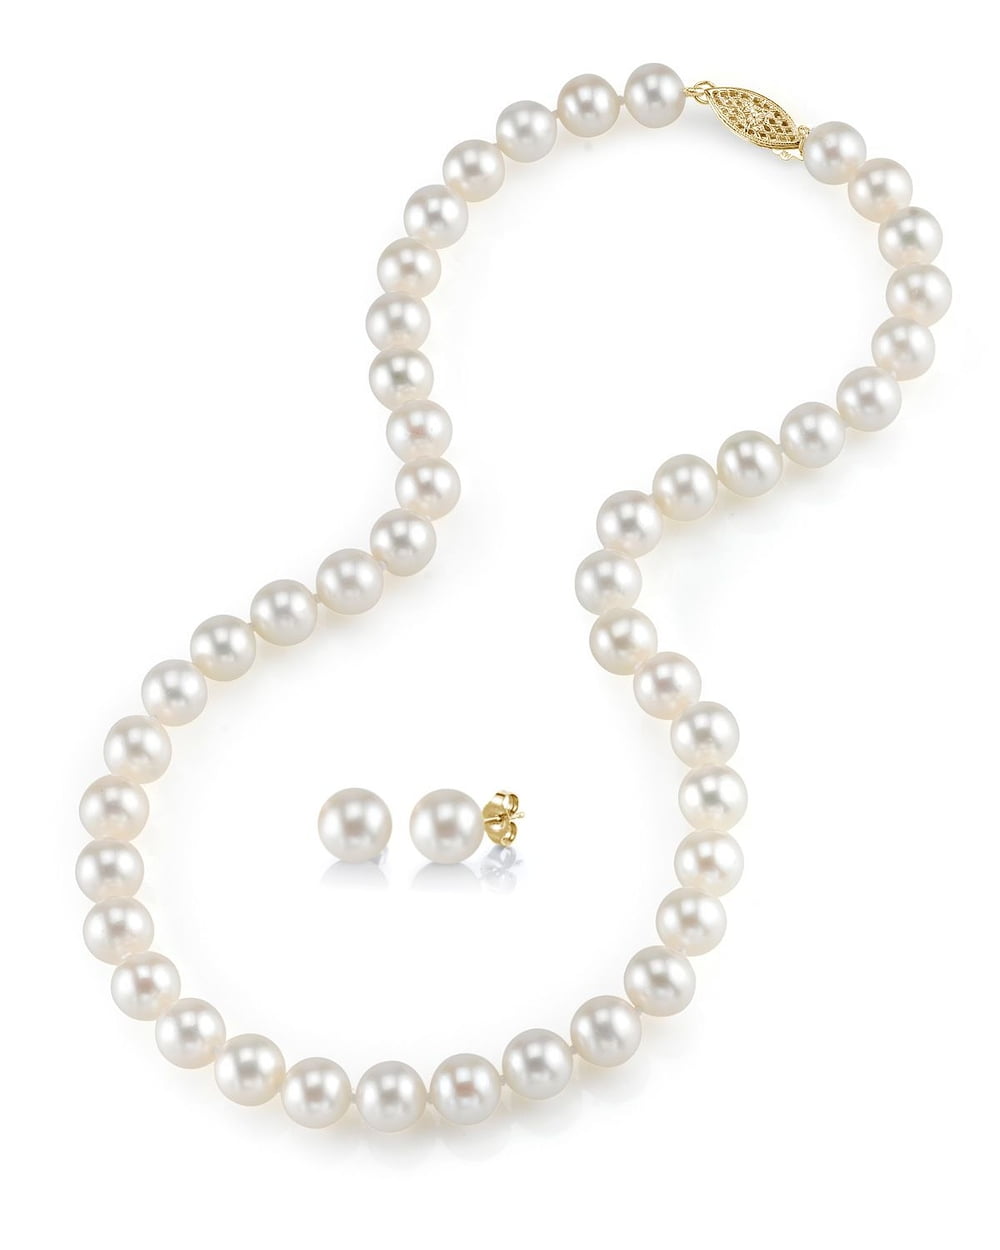 White Cultured Pearl Necklace & Earrings 8-9mm AAA Grade 14k Solid Gold 